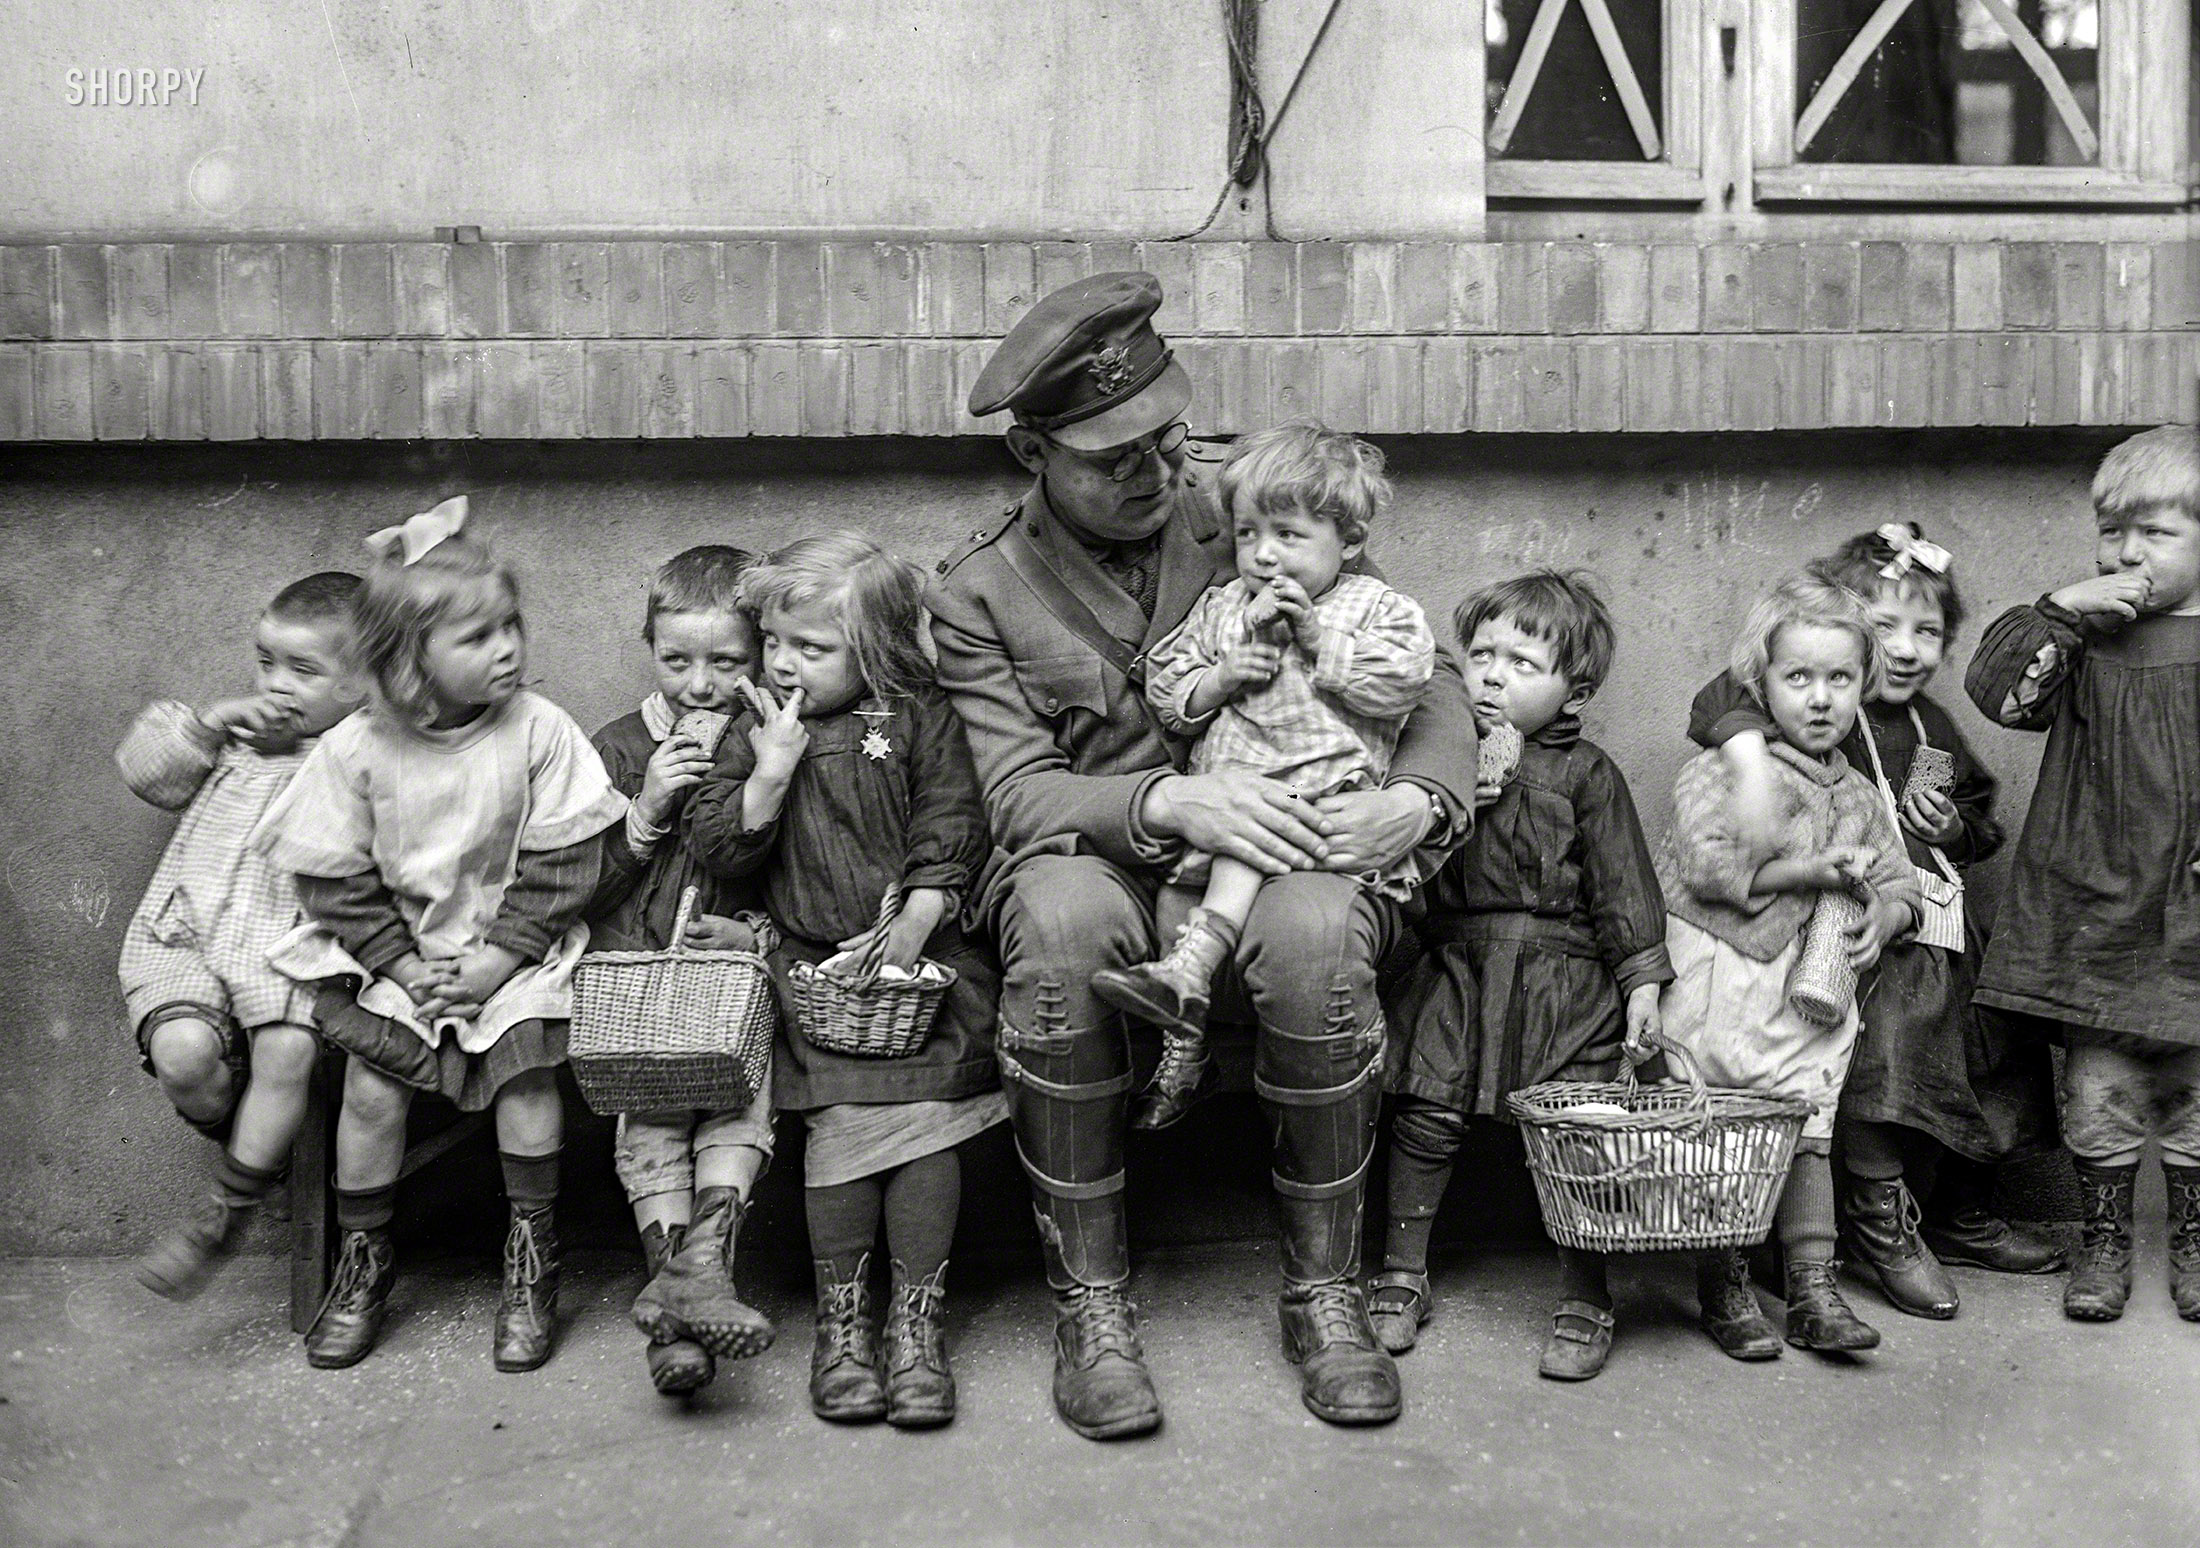 March 1919. "Marseilles, France. Refugee children from Belgium, happy while in the care of the American Red Cross." 5x7 glass negative. View full size.